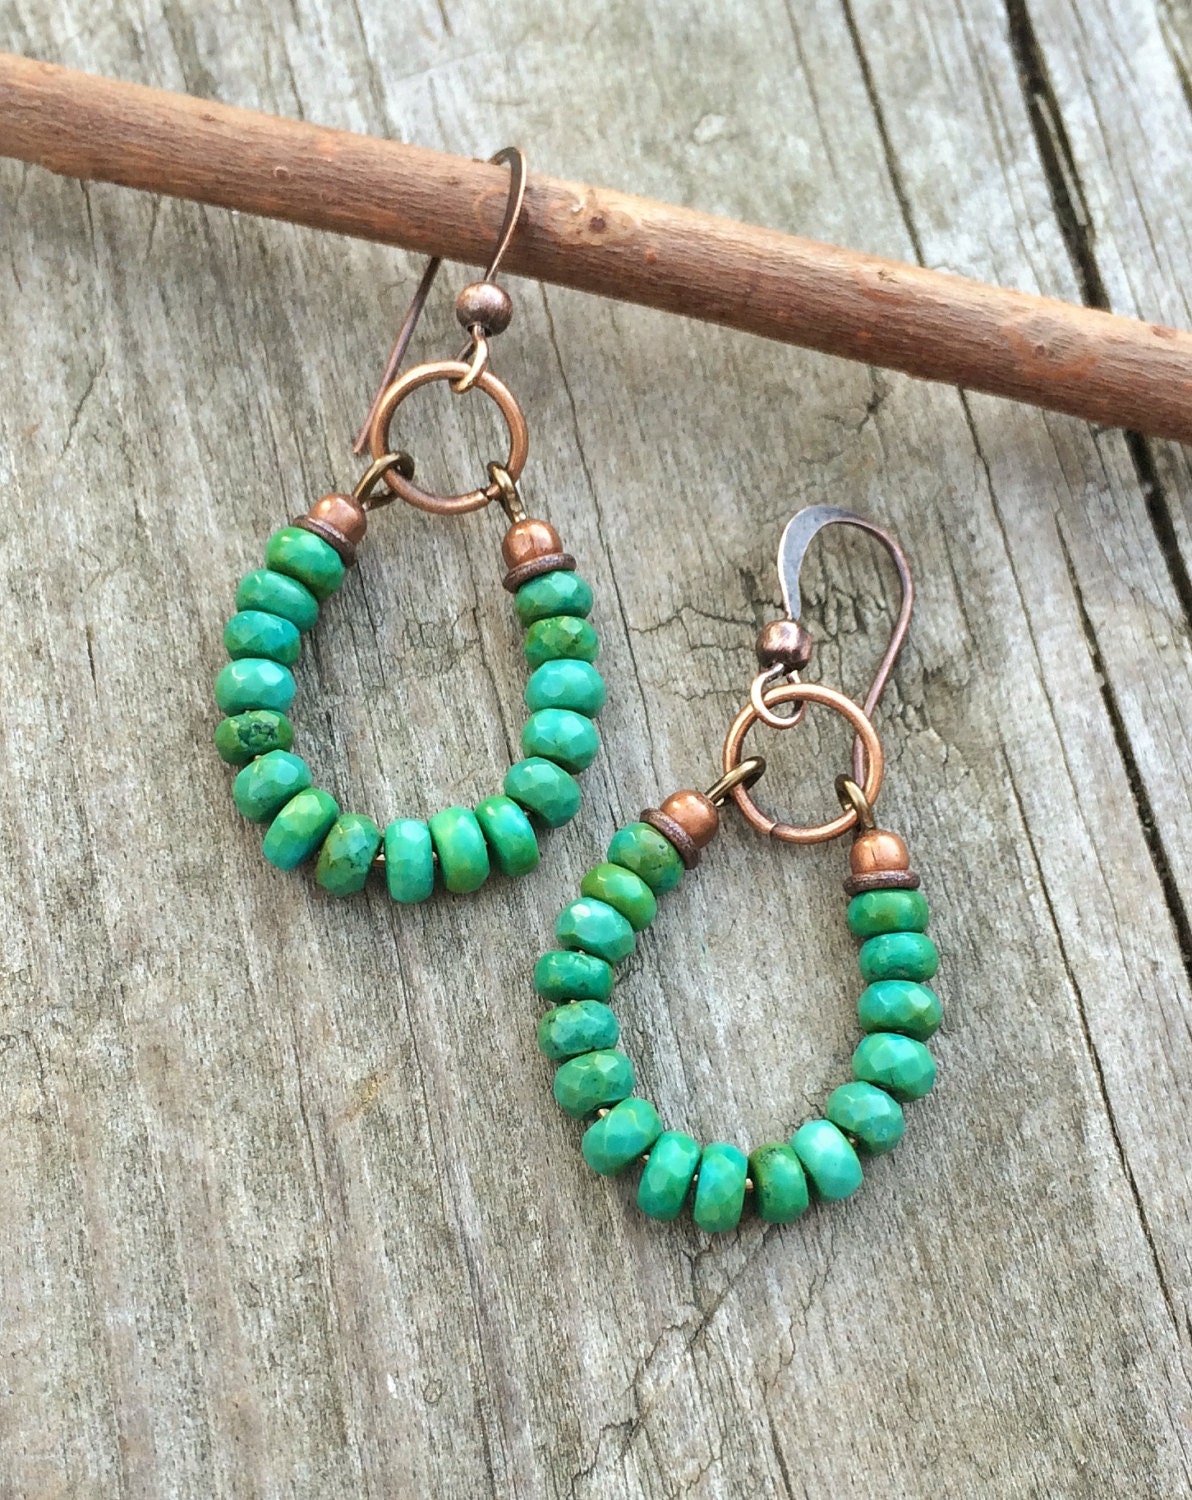 Turquoise Earrings Blue Green Turquoise and Copper Hoop